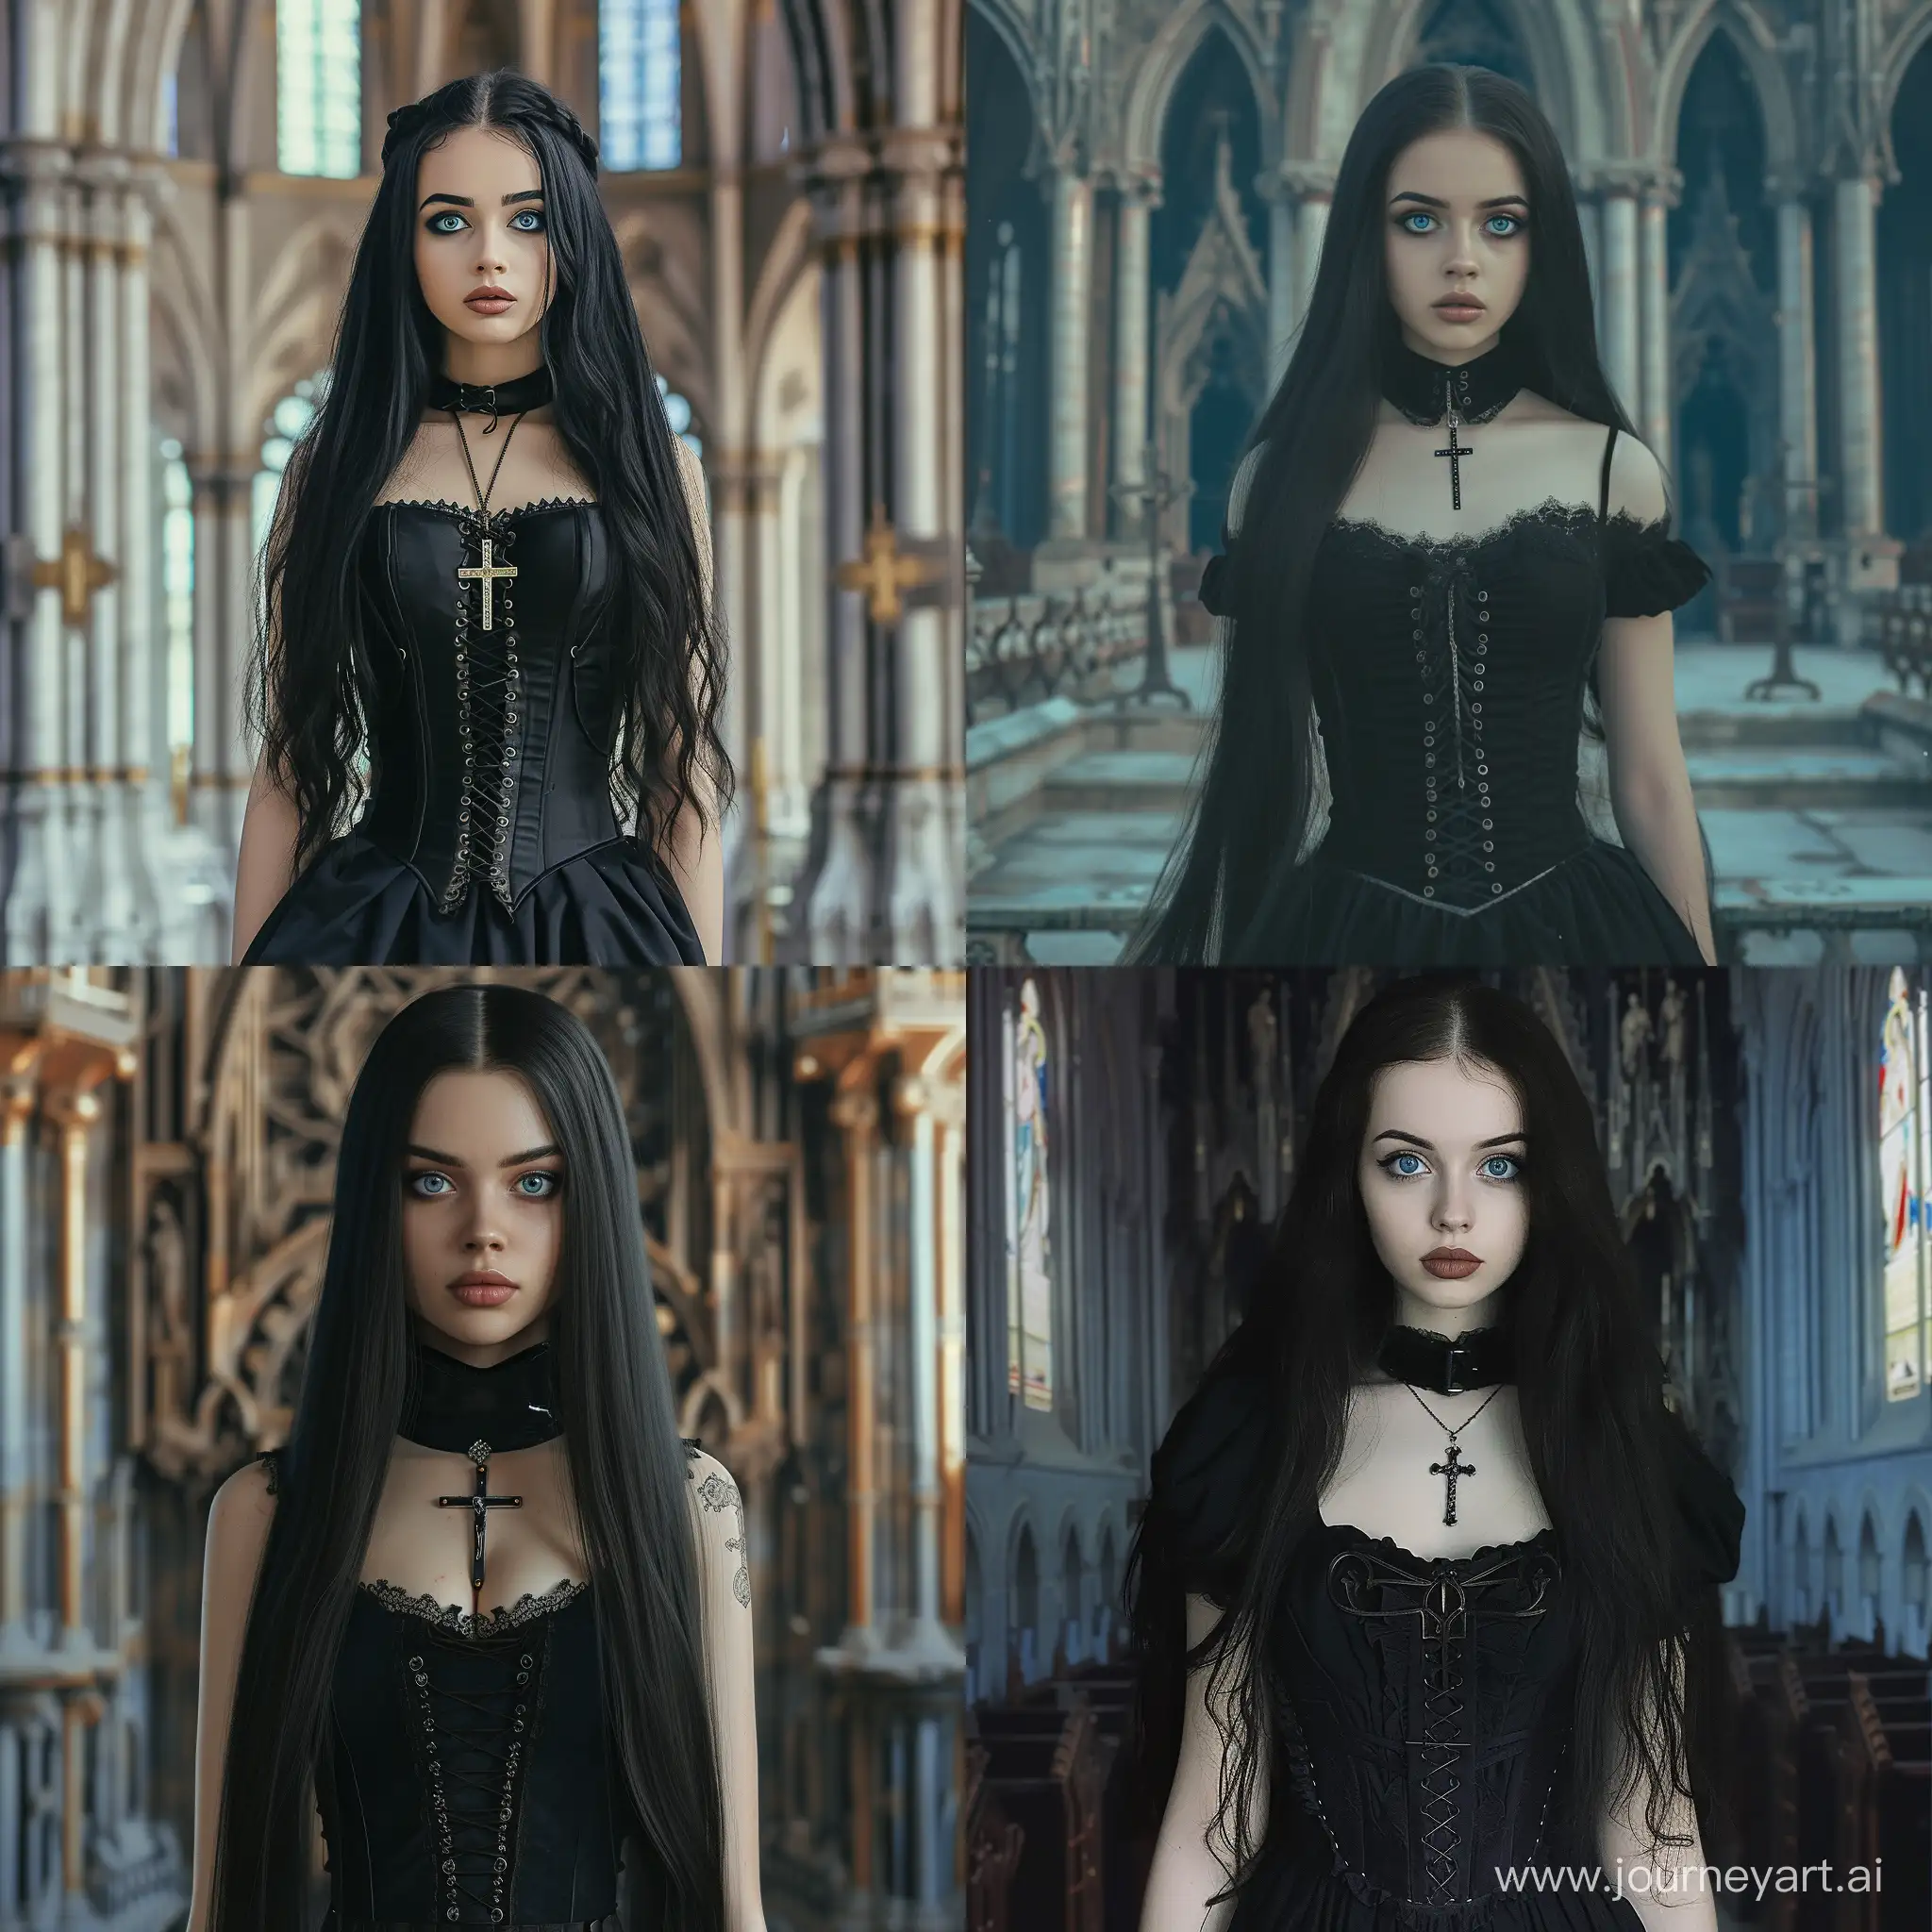 a young woman with long black hair blue eyes thick eyebrow wearing a black dress with a corset at the waist and a crucifix necklace in front of a gothic style Catholic church